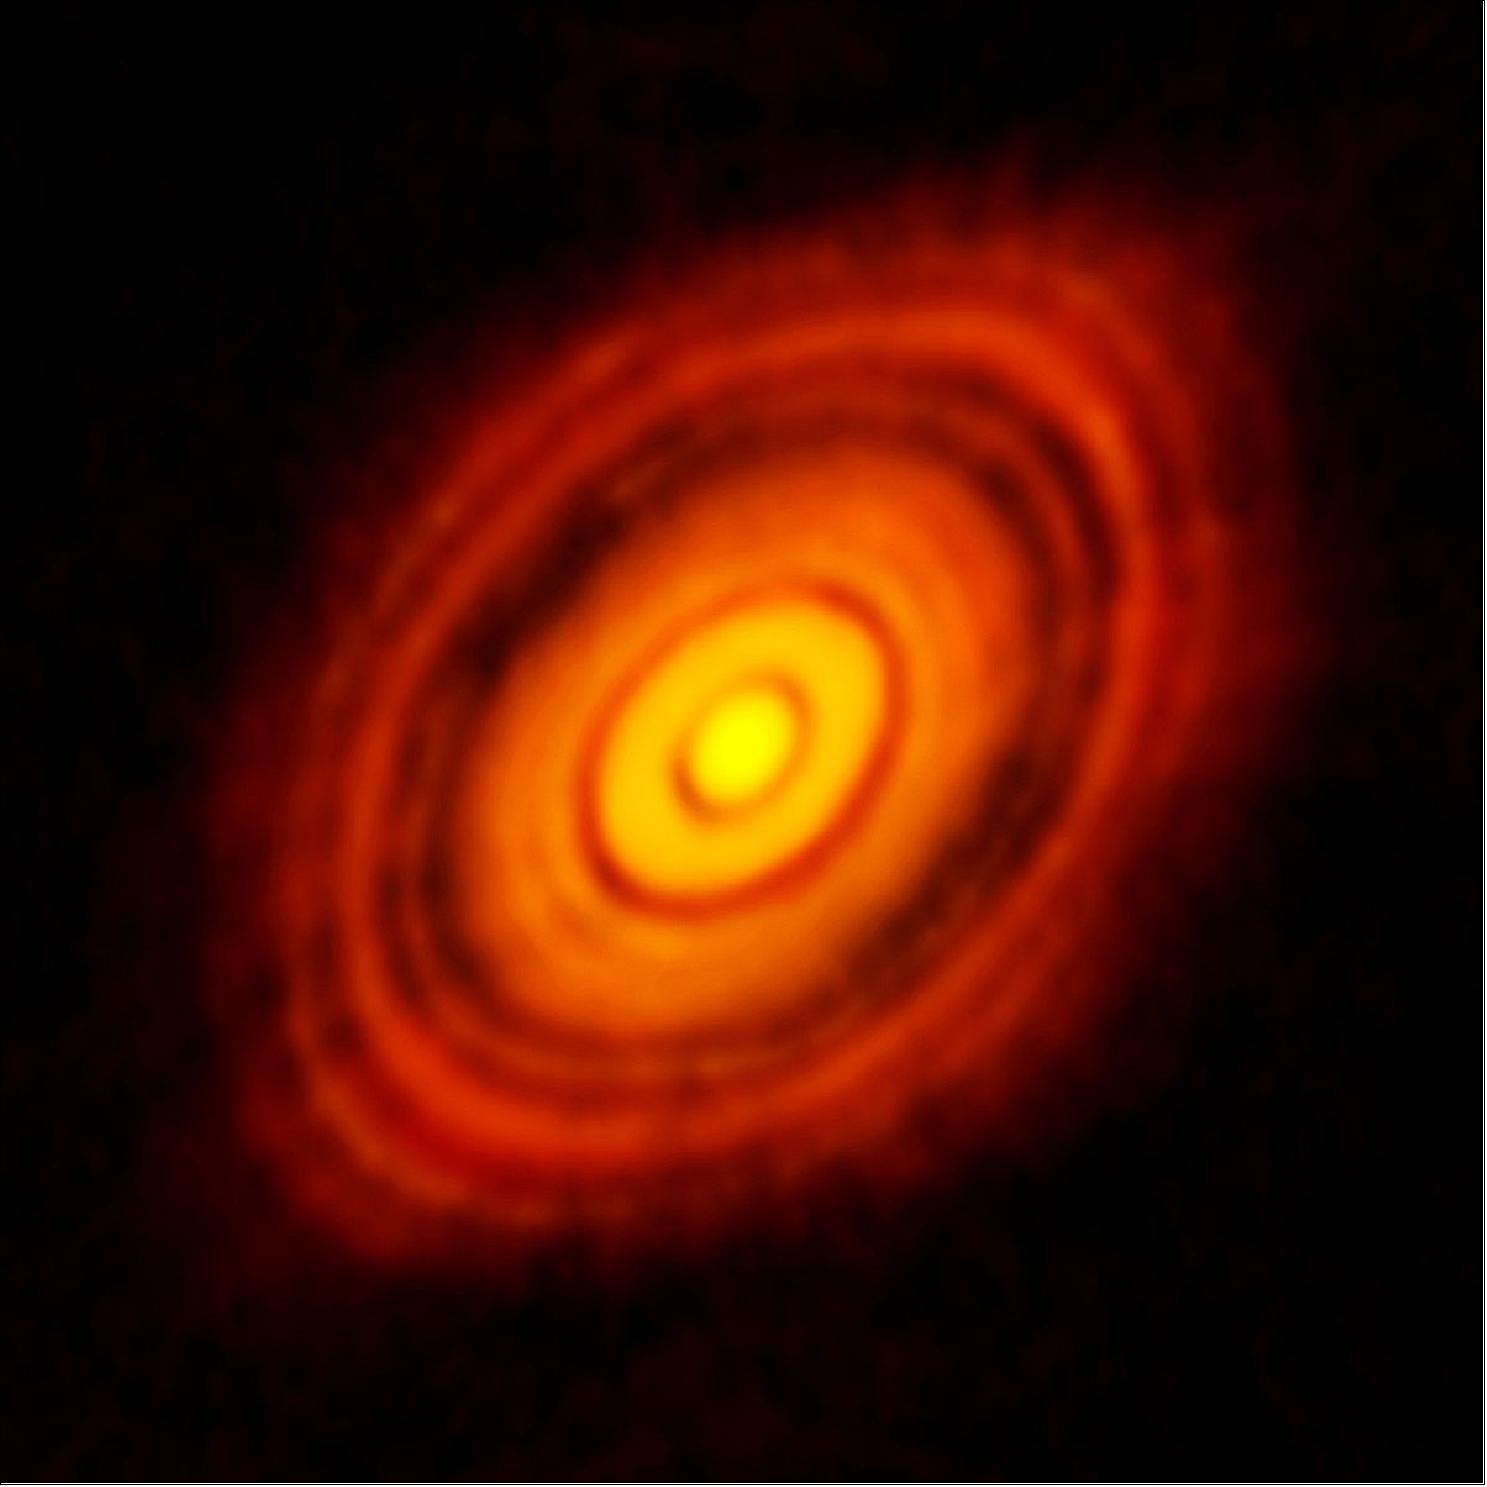 Figure 59: This is the sharpest image ever taken by ALMA — sharper than is routinely achieved in visible light with the NASA/ESA Hubble Space Telescope. It shows the protoplanetary disc surrounding the young star HL Tauri. These new ALMA observations reveal substructures within the disc that have never been seen before and even show the possible positions of planets forming in the dark patches within the system (image credit: ALMA, ESO/NAOJ/NRAO)